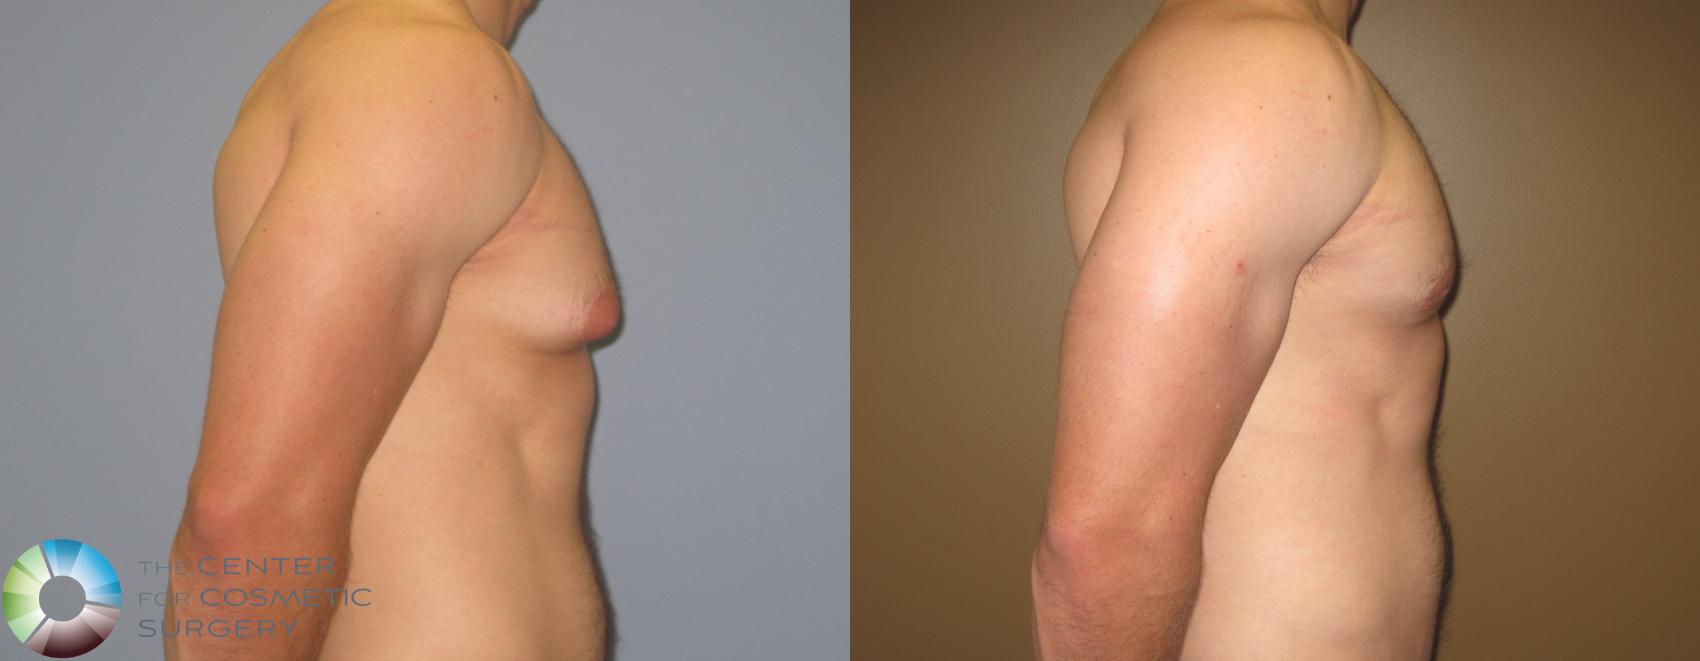 Before & After Male Breast Reduction (Gynecomastia) Case 451 View #1 in Denver and Colorado Springs, CO